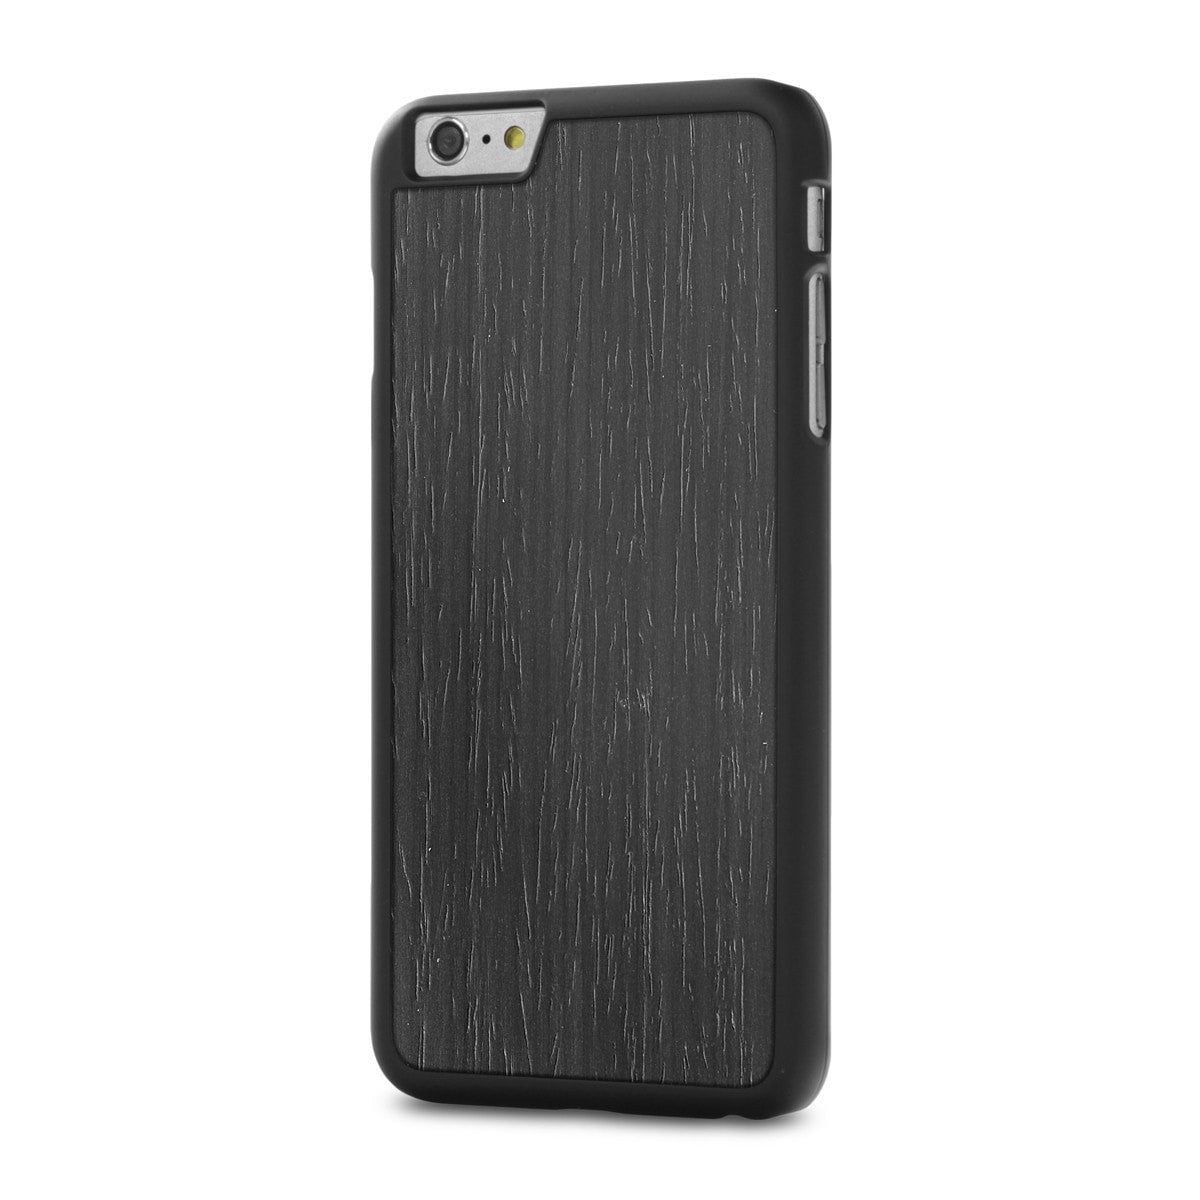  iPhone 6/6s Plus — #WoodBack Snap Case - Cover-Up - 1